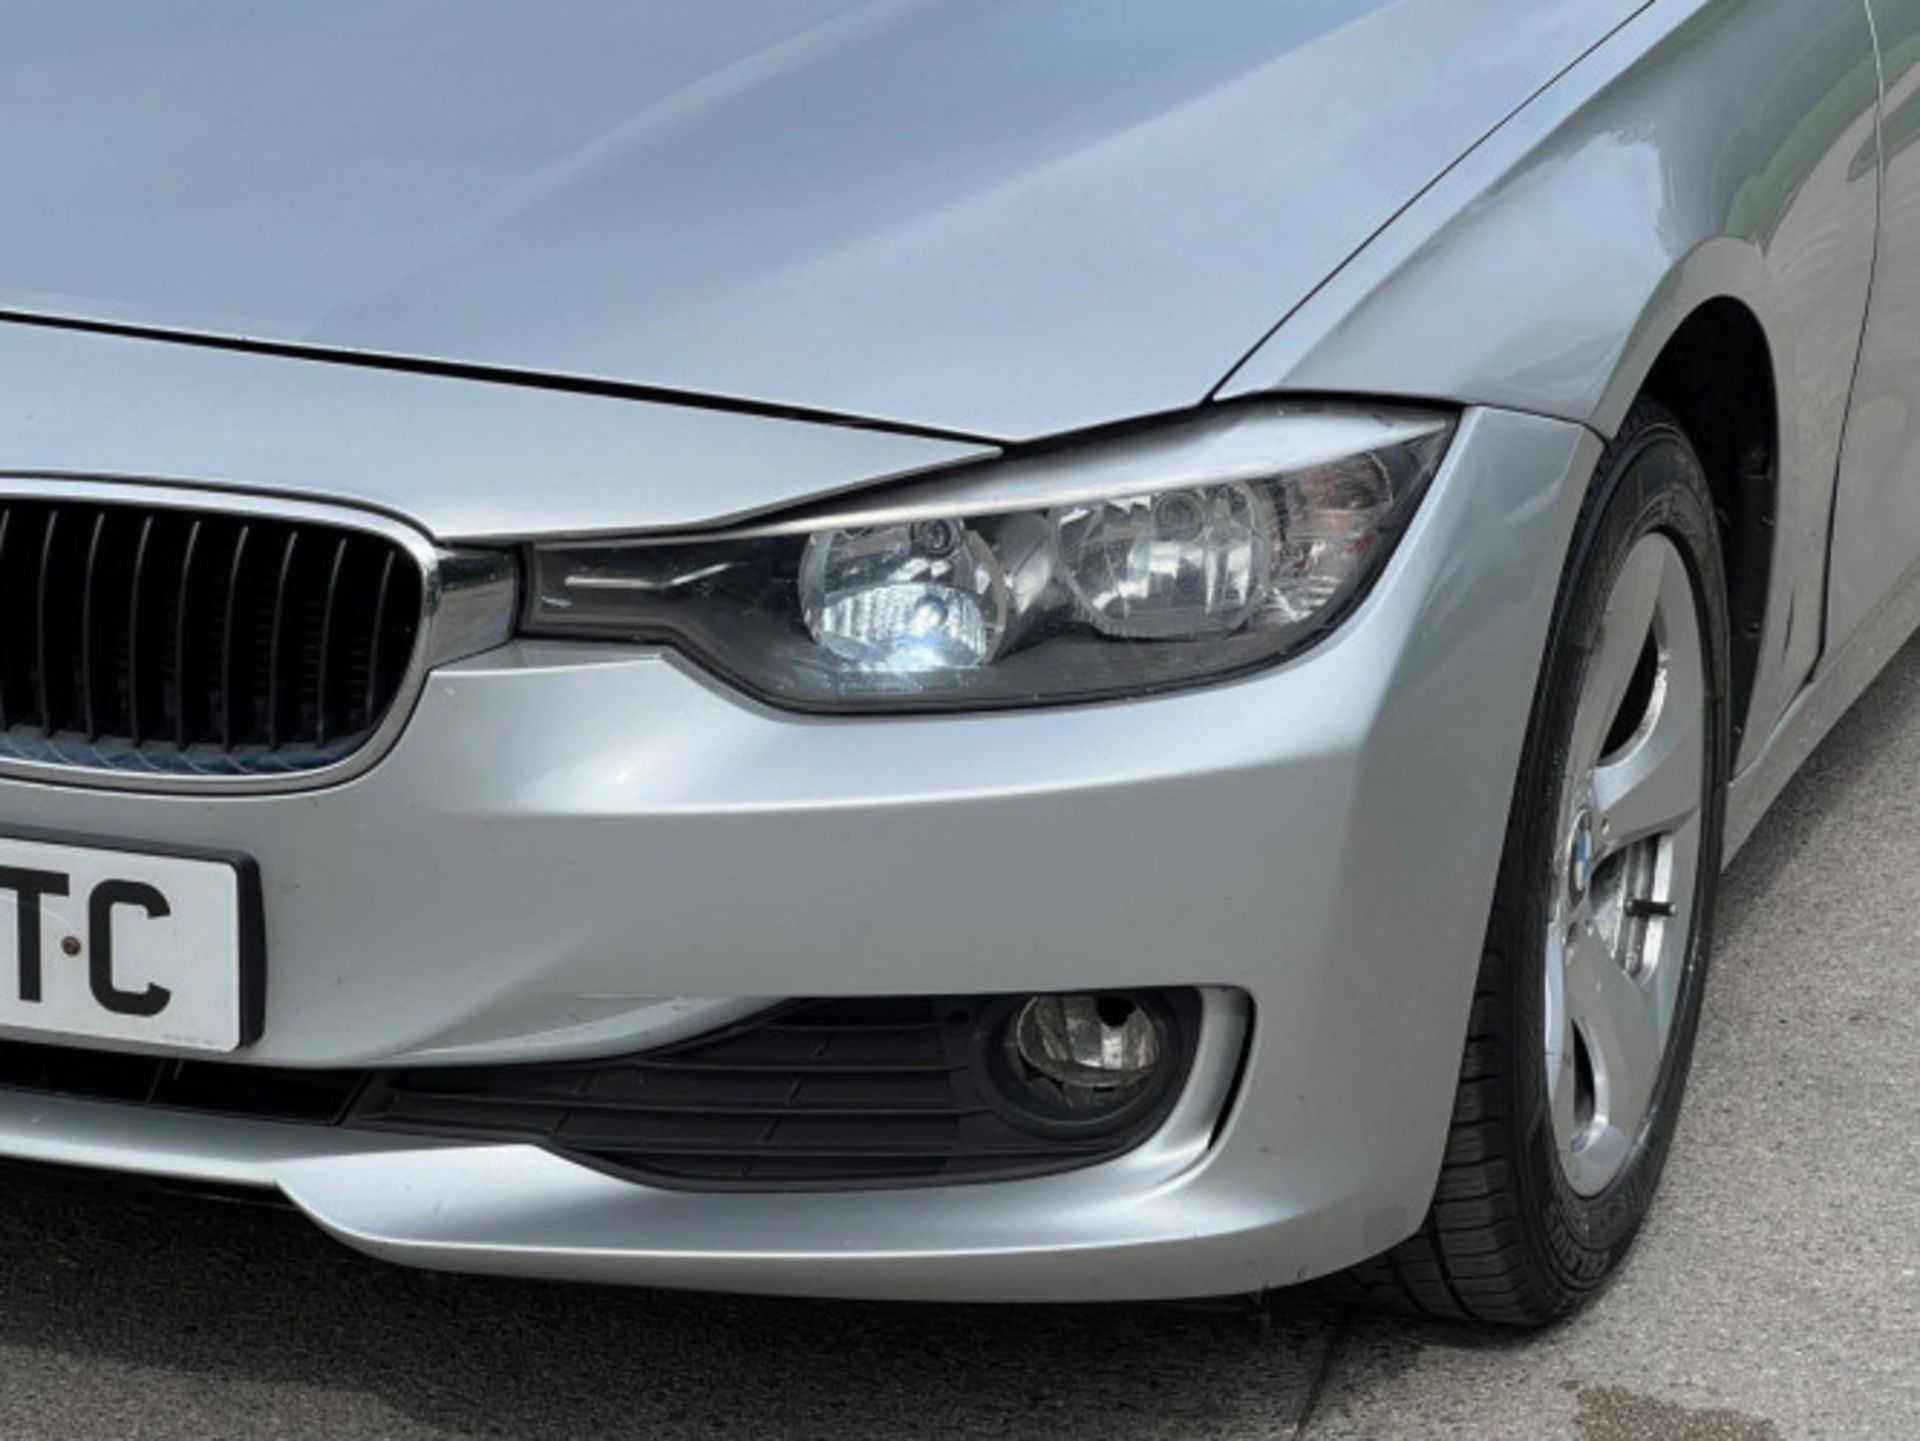 BMW 3 SERIES 2.0 DIESEL ED START STOP - A WELL-MAINTAINED GEM >>--NO VAT ON HAMMER--<< - Image 207 of 229